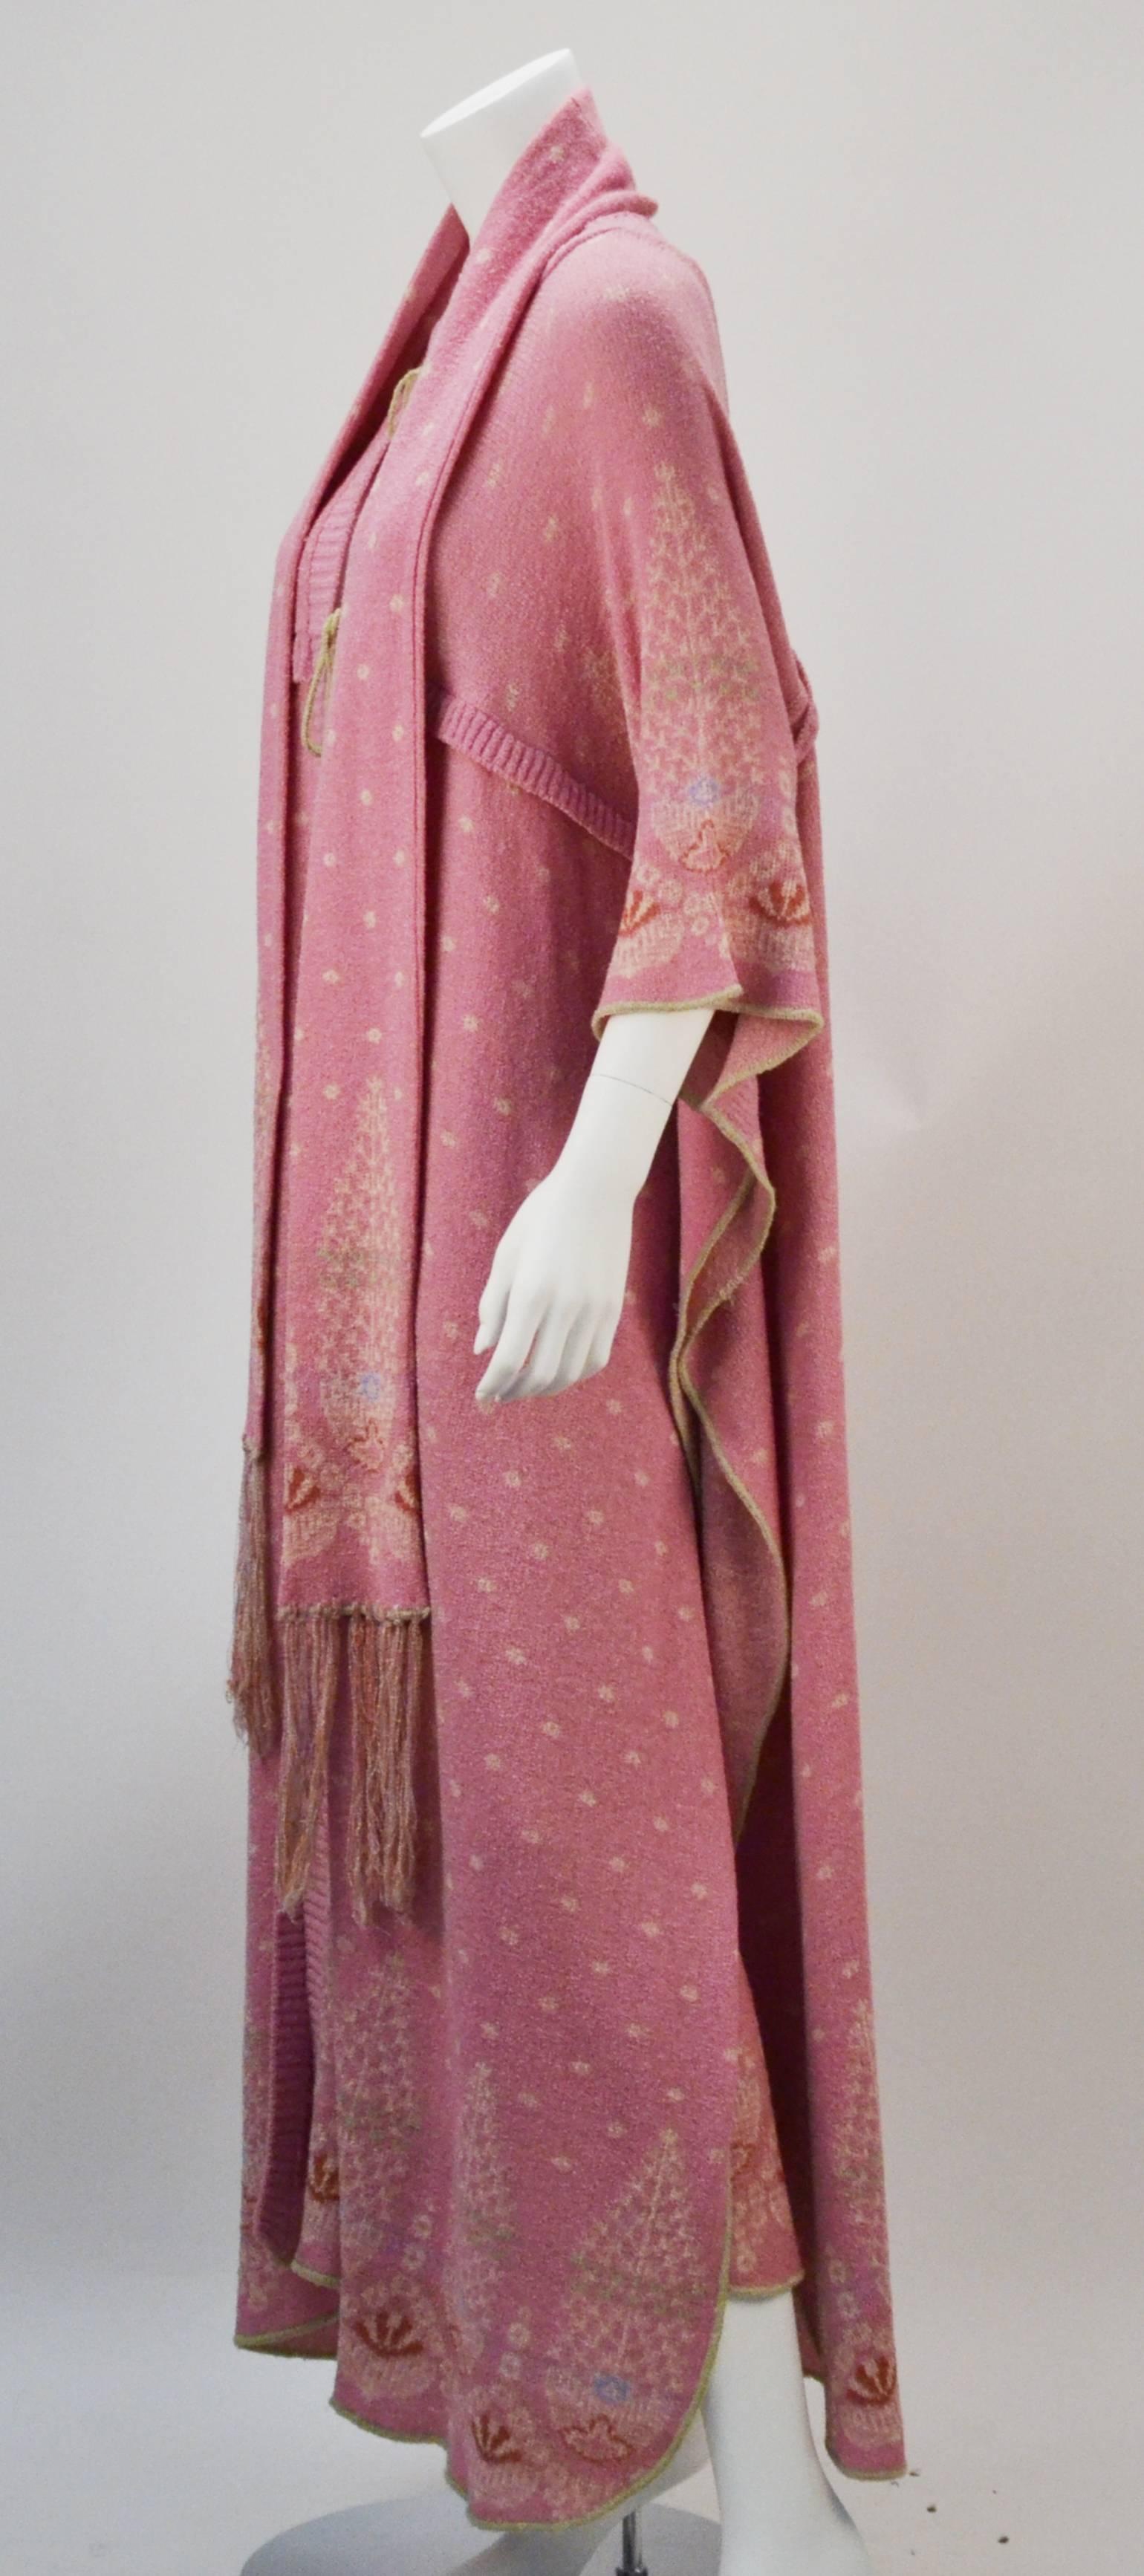 Museum quality 1975 Bill Gibb pale pink knit coat, skirt, and scarf featuring a folkloric-inspired pattern. The coat highlights dramatic kimono style sleeves and ties at both front and back. The skirt has a waistline that ties at one side and a